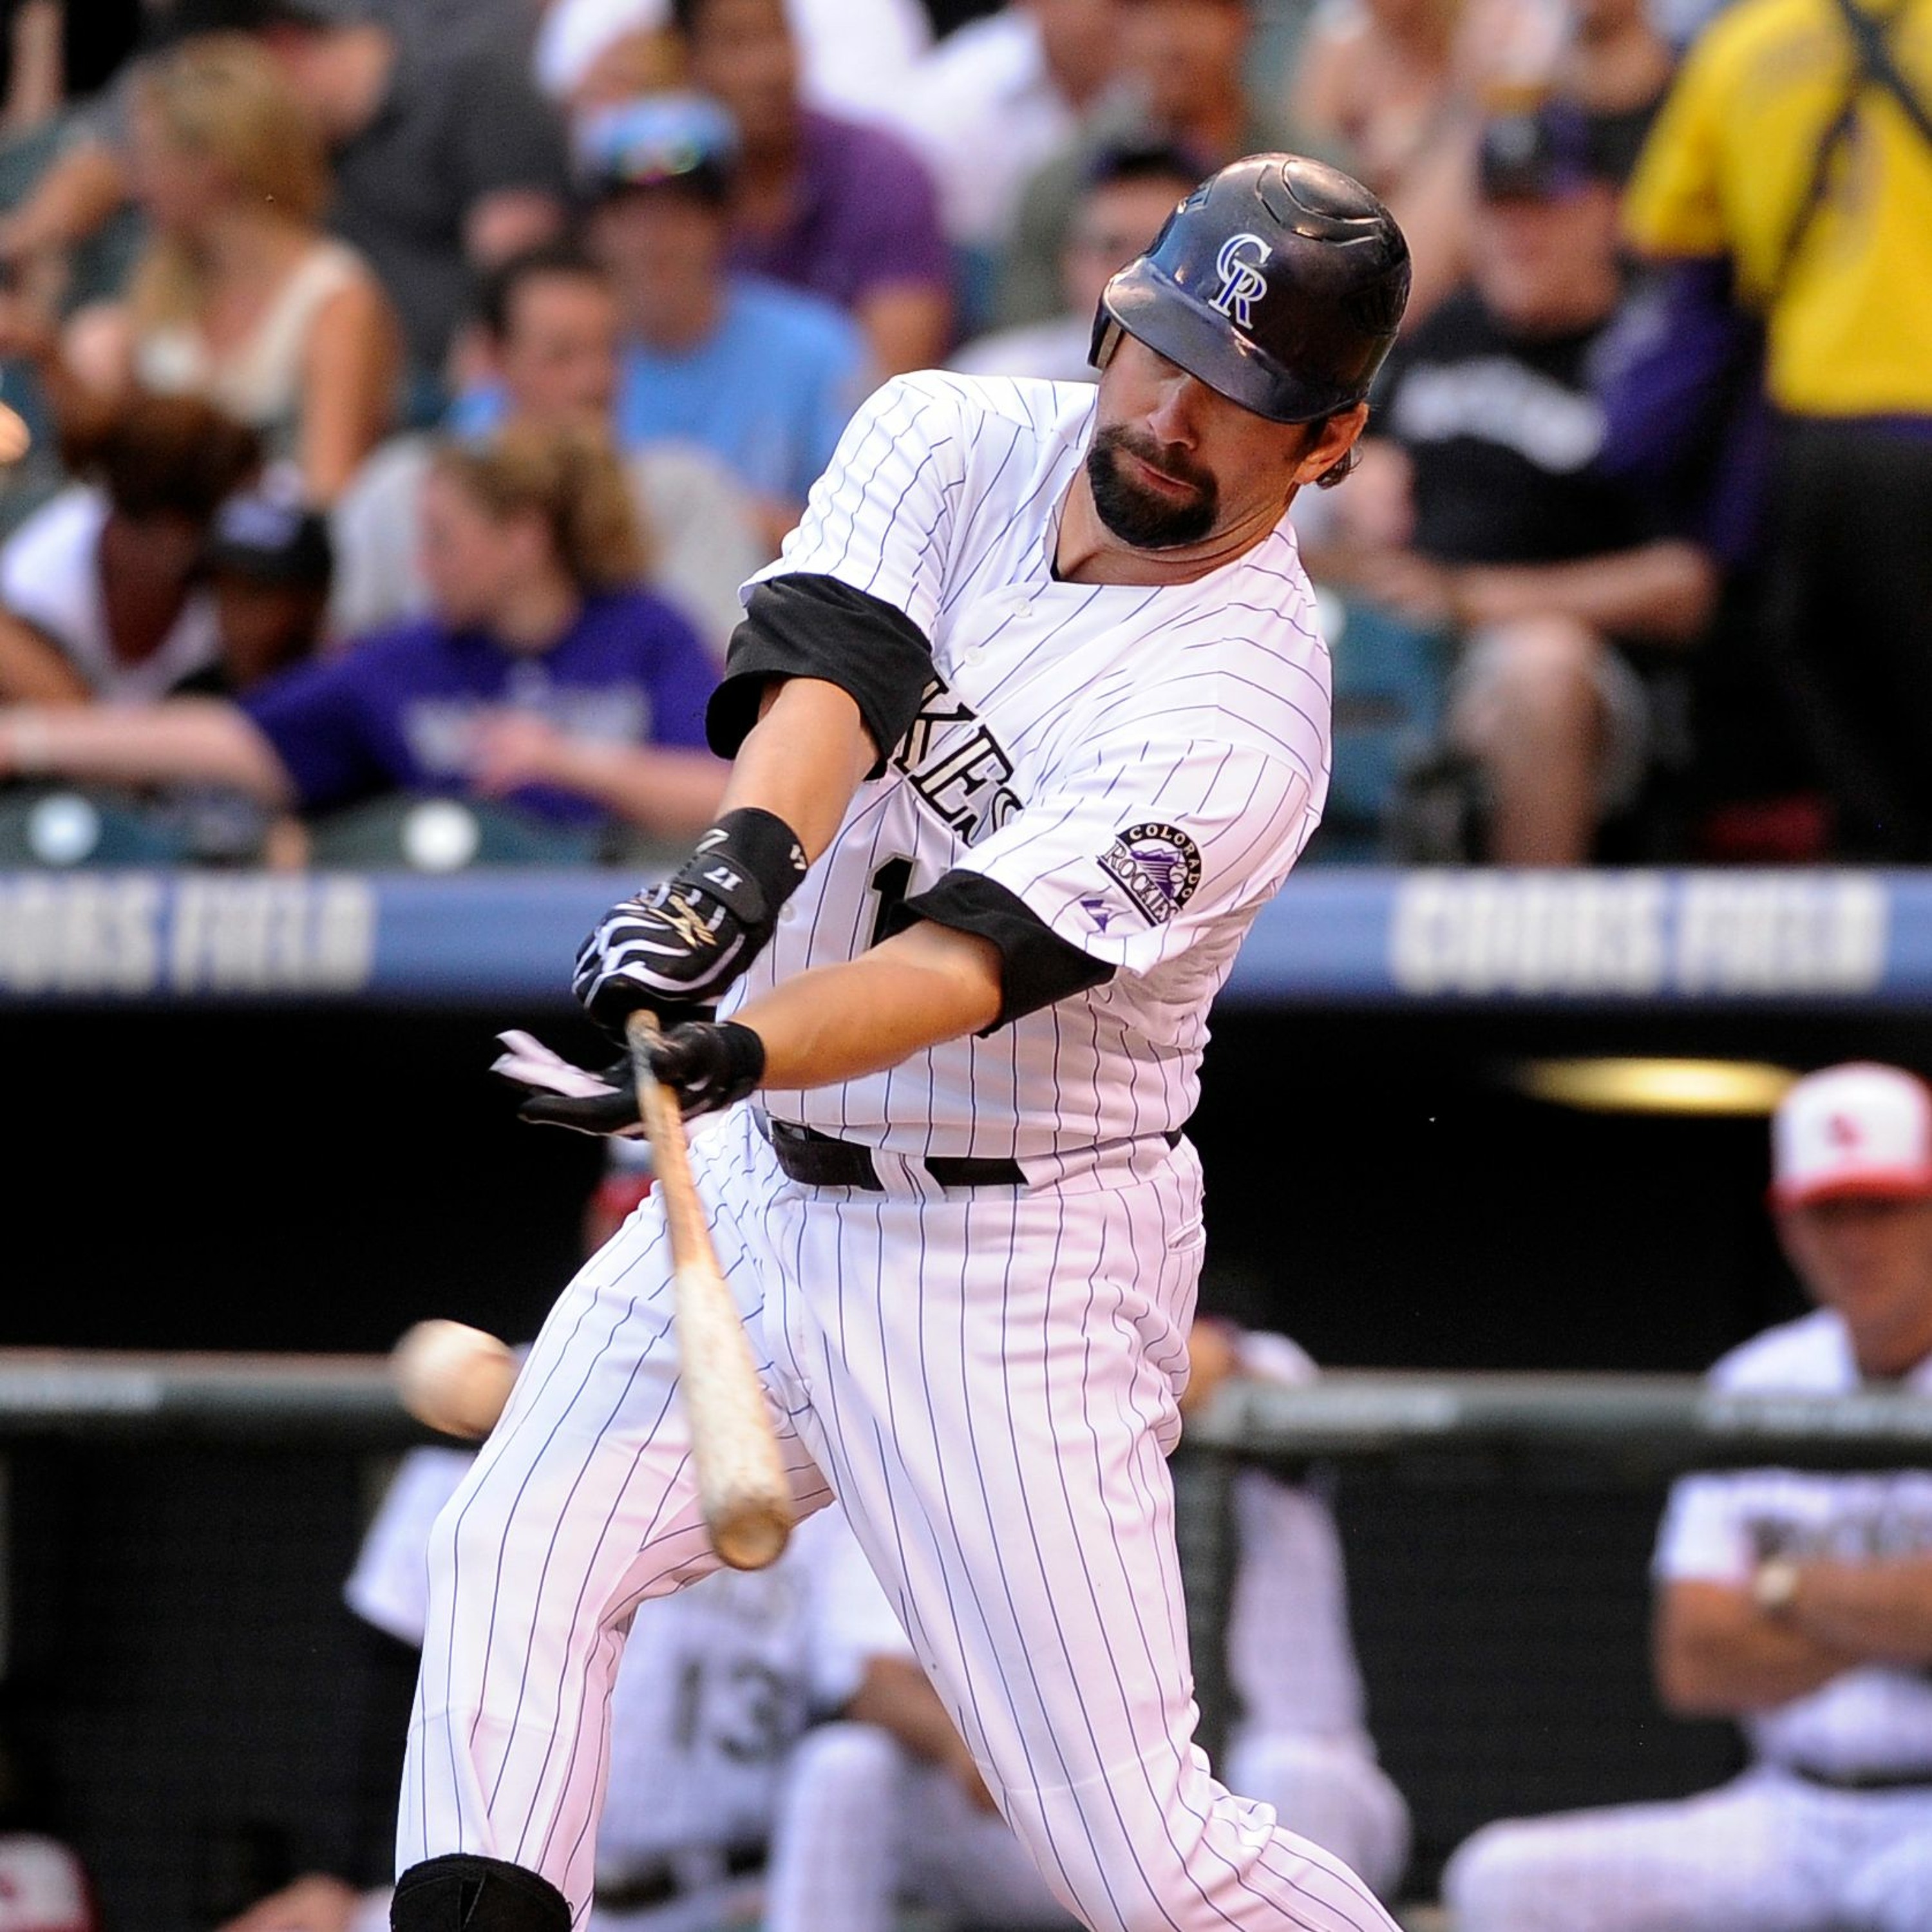 Ep. 158 -- Rockies fall further behind in NL West, analysis on Todd Helton’s Hall trajectory